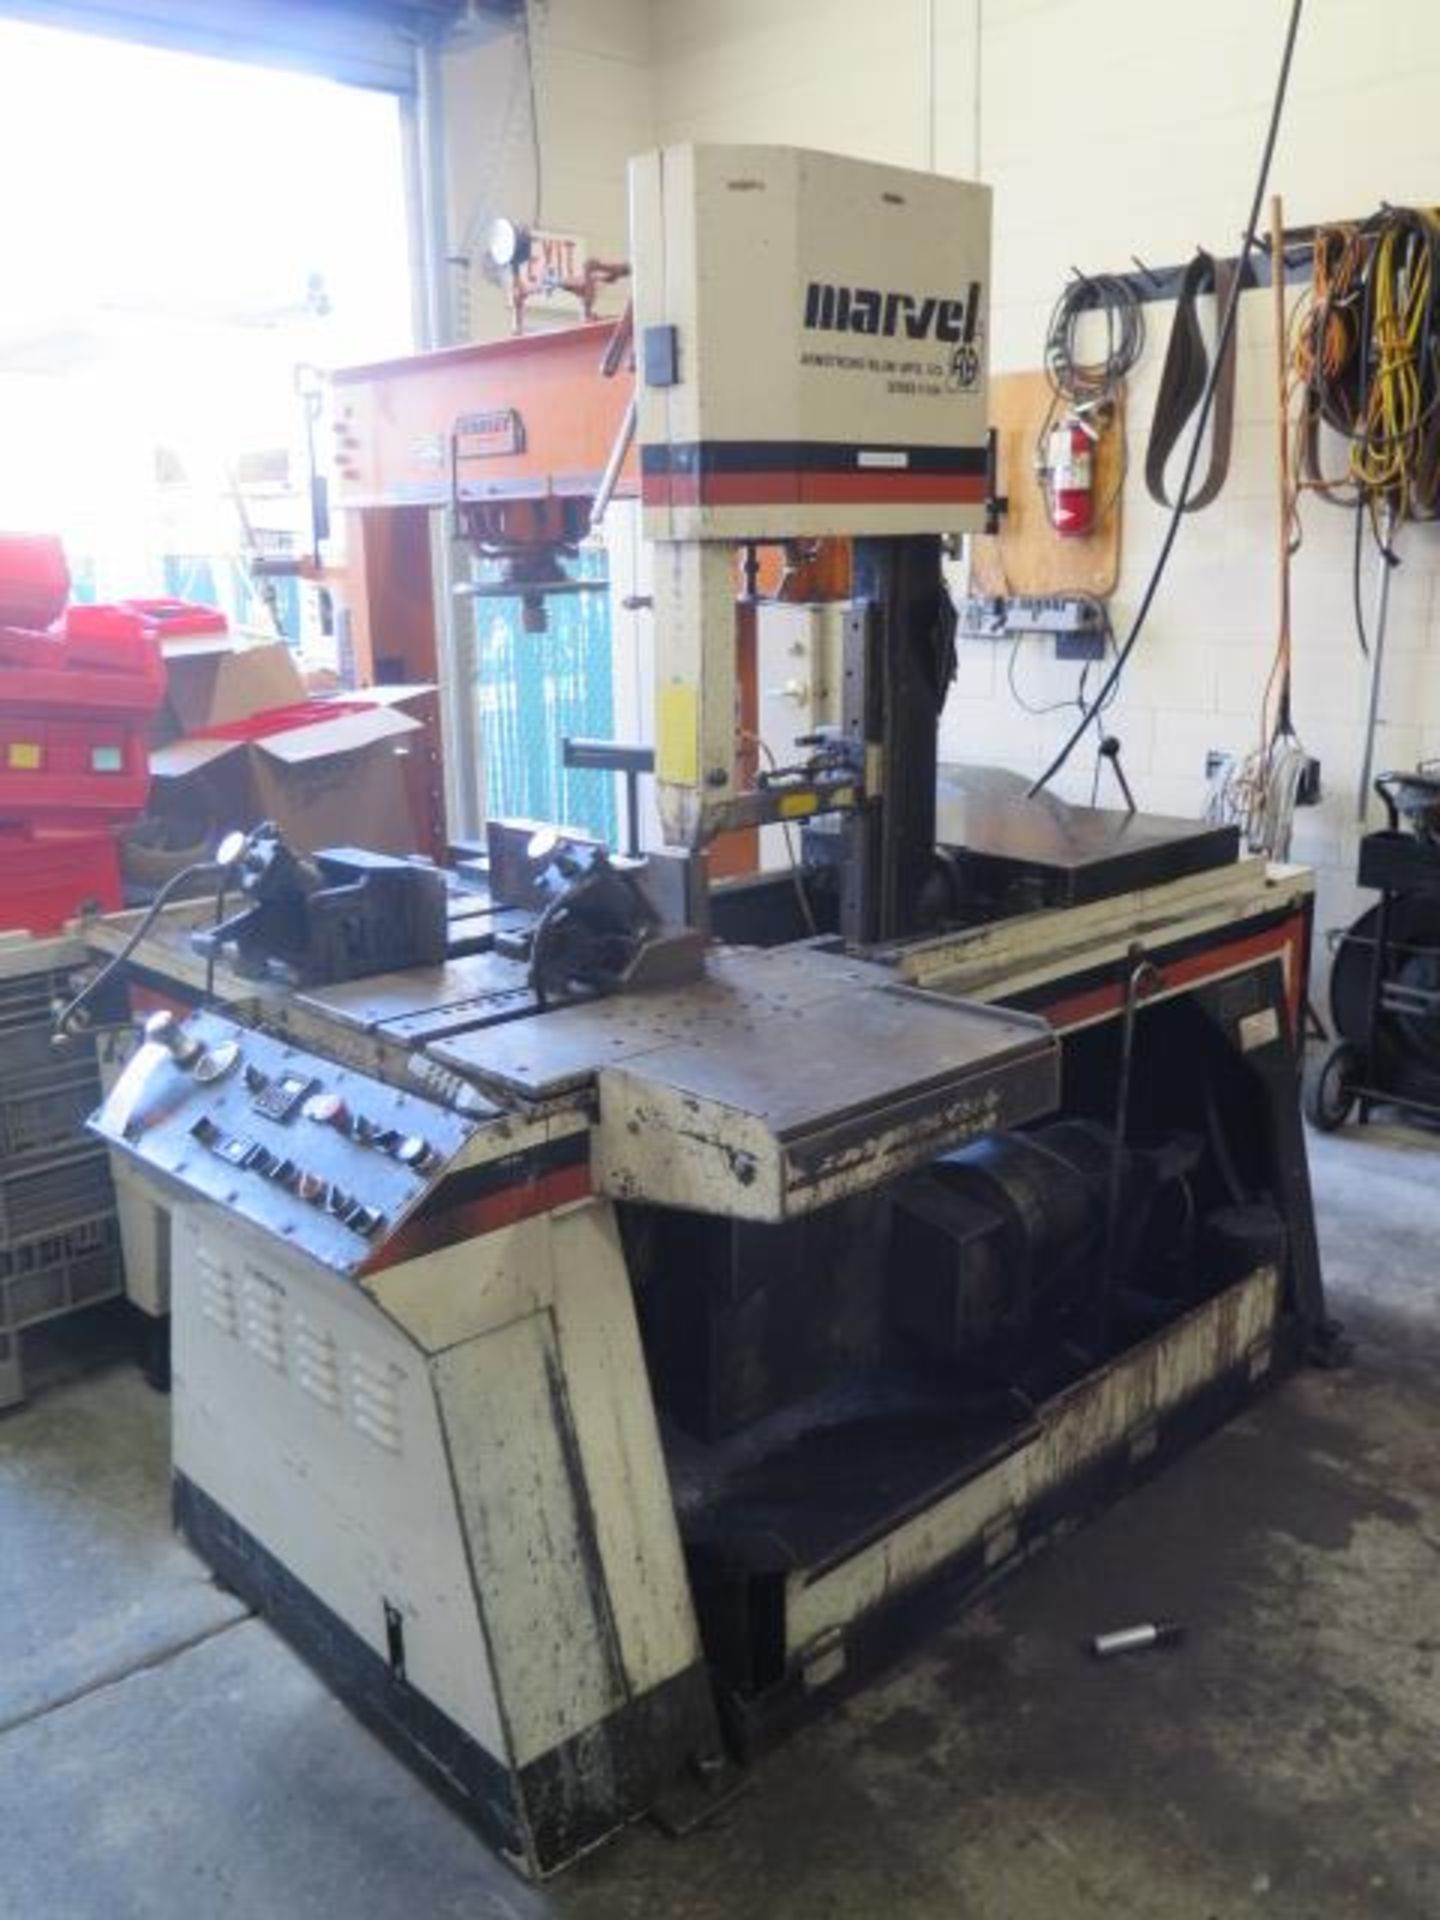 Marvel mdl. V10A2 Vertical Band Saw s/n 170010-W w/ Hydrailic Clamping,Coolamt, Conveyor, SOLD AS IS - Image 2 of 14